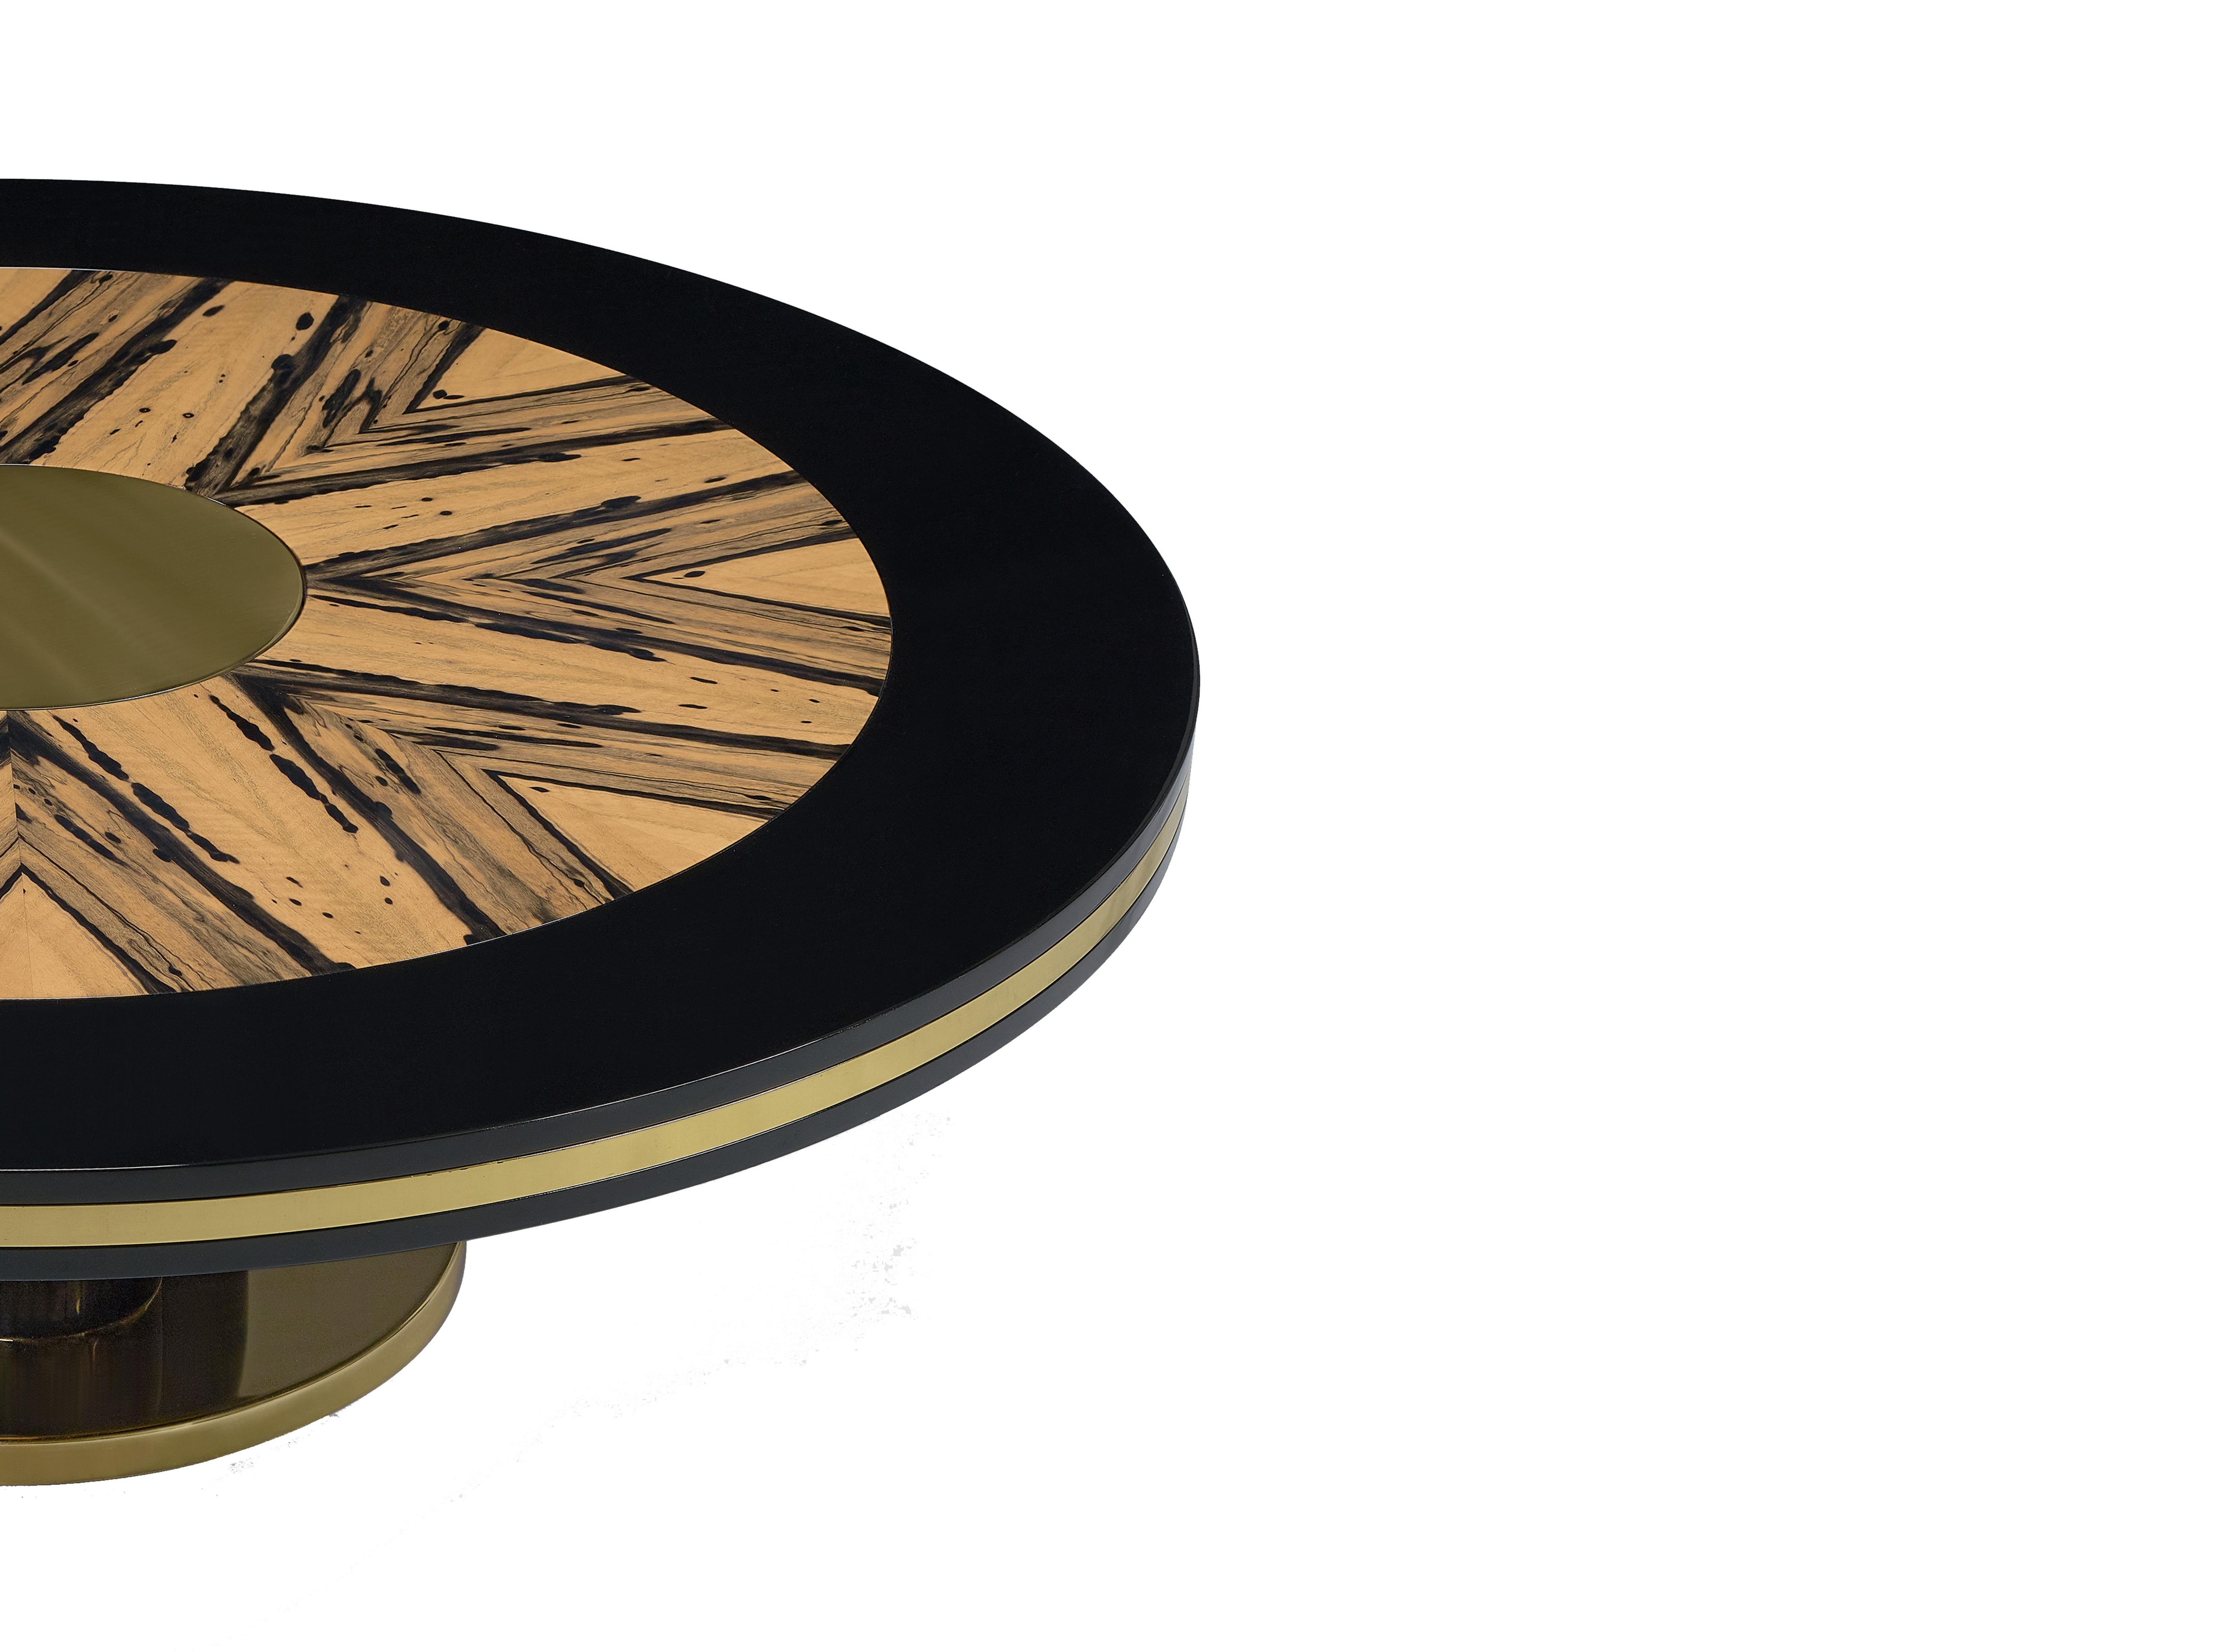 Ebony Center Table by Memoir Essence
Dimensions: D 120 x W 120 x H 27 cm.
Materials: Polished brass, lacquer and Royal ebony.

An exquisite combination of royal ebony veneer and black lacquered wood, finished in high gloss varnish. Ebony Center